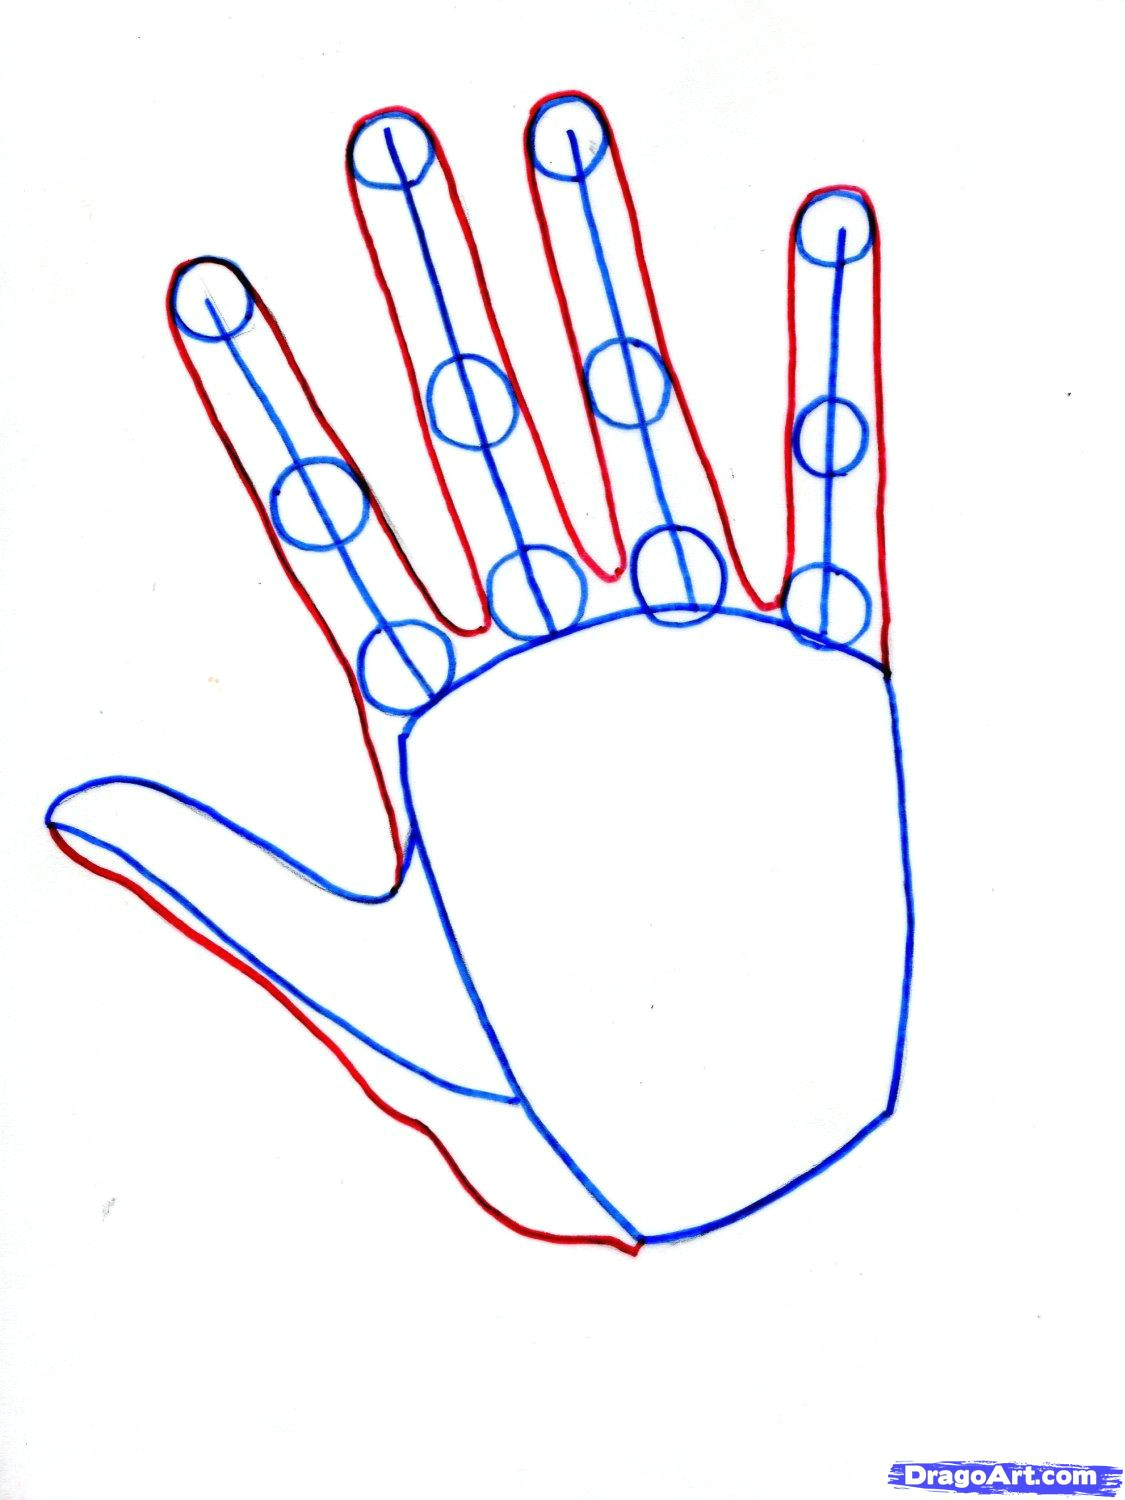 Drawing Hands In Steps How to Draw Hands